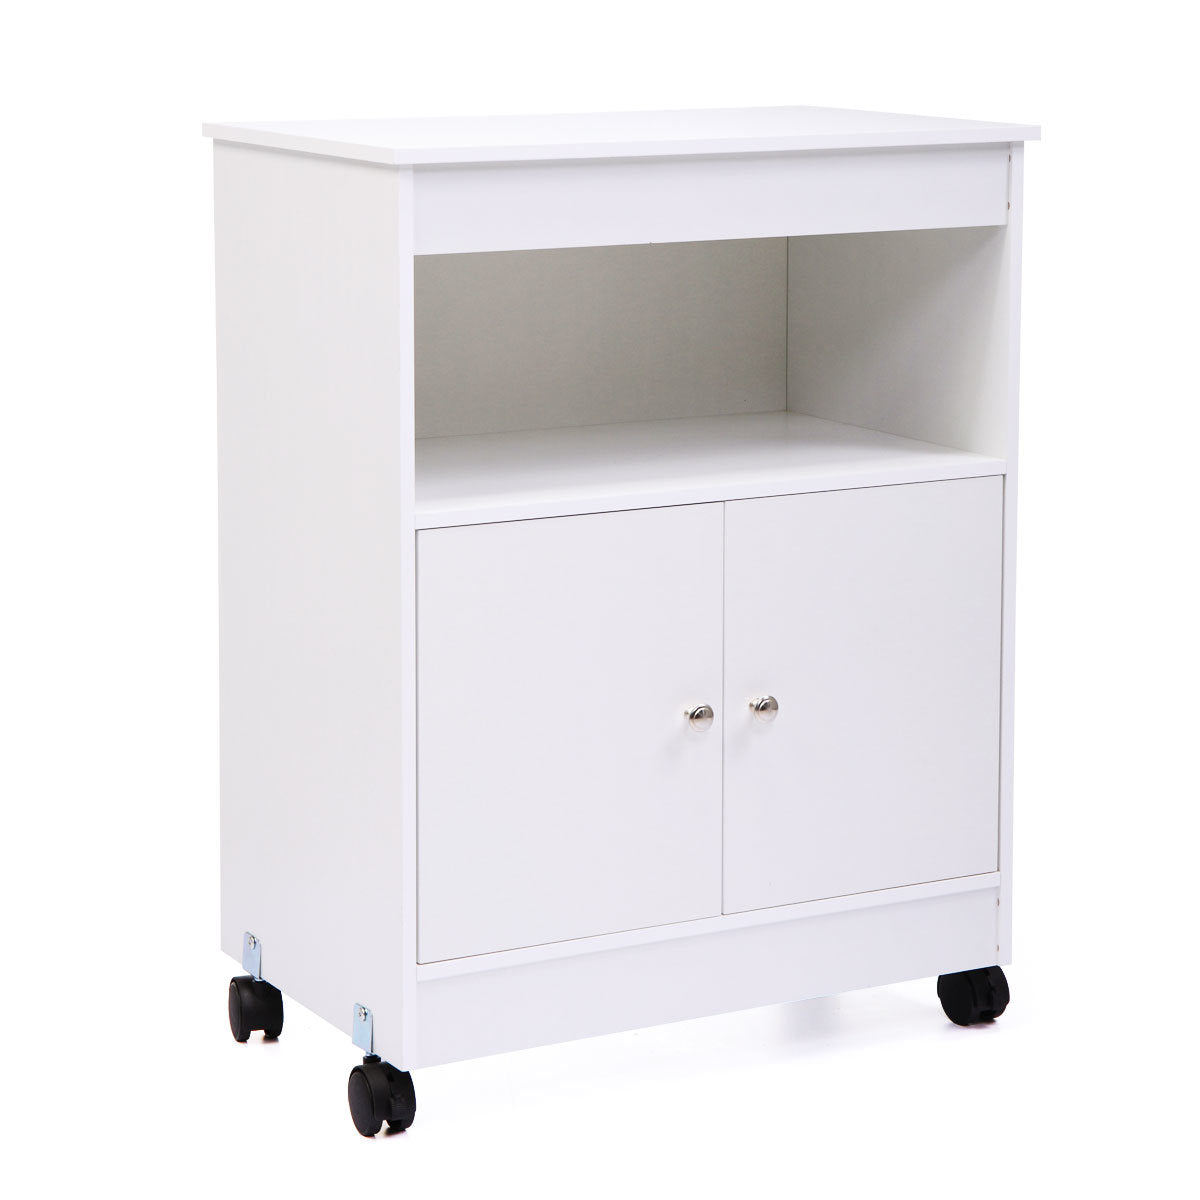 Wood Kitchen Microwave Cabinet Cart with 4 Universal Wheels and Roomy Inner Space for Home Use; White